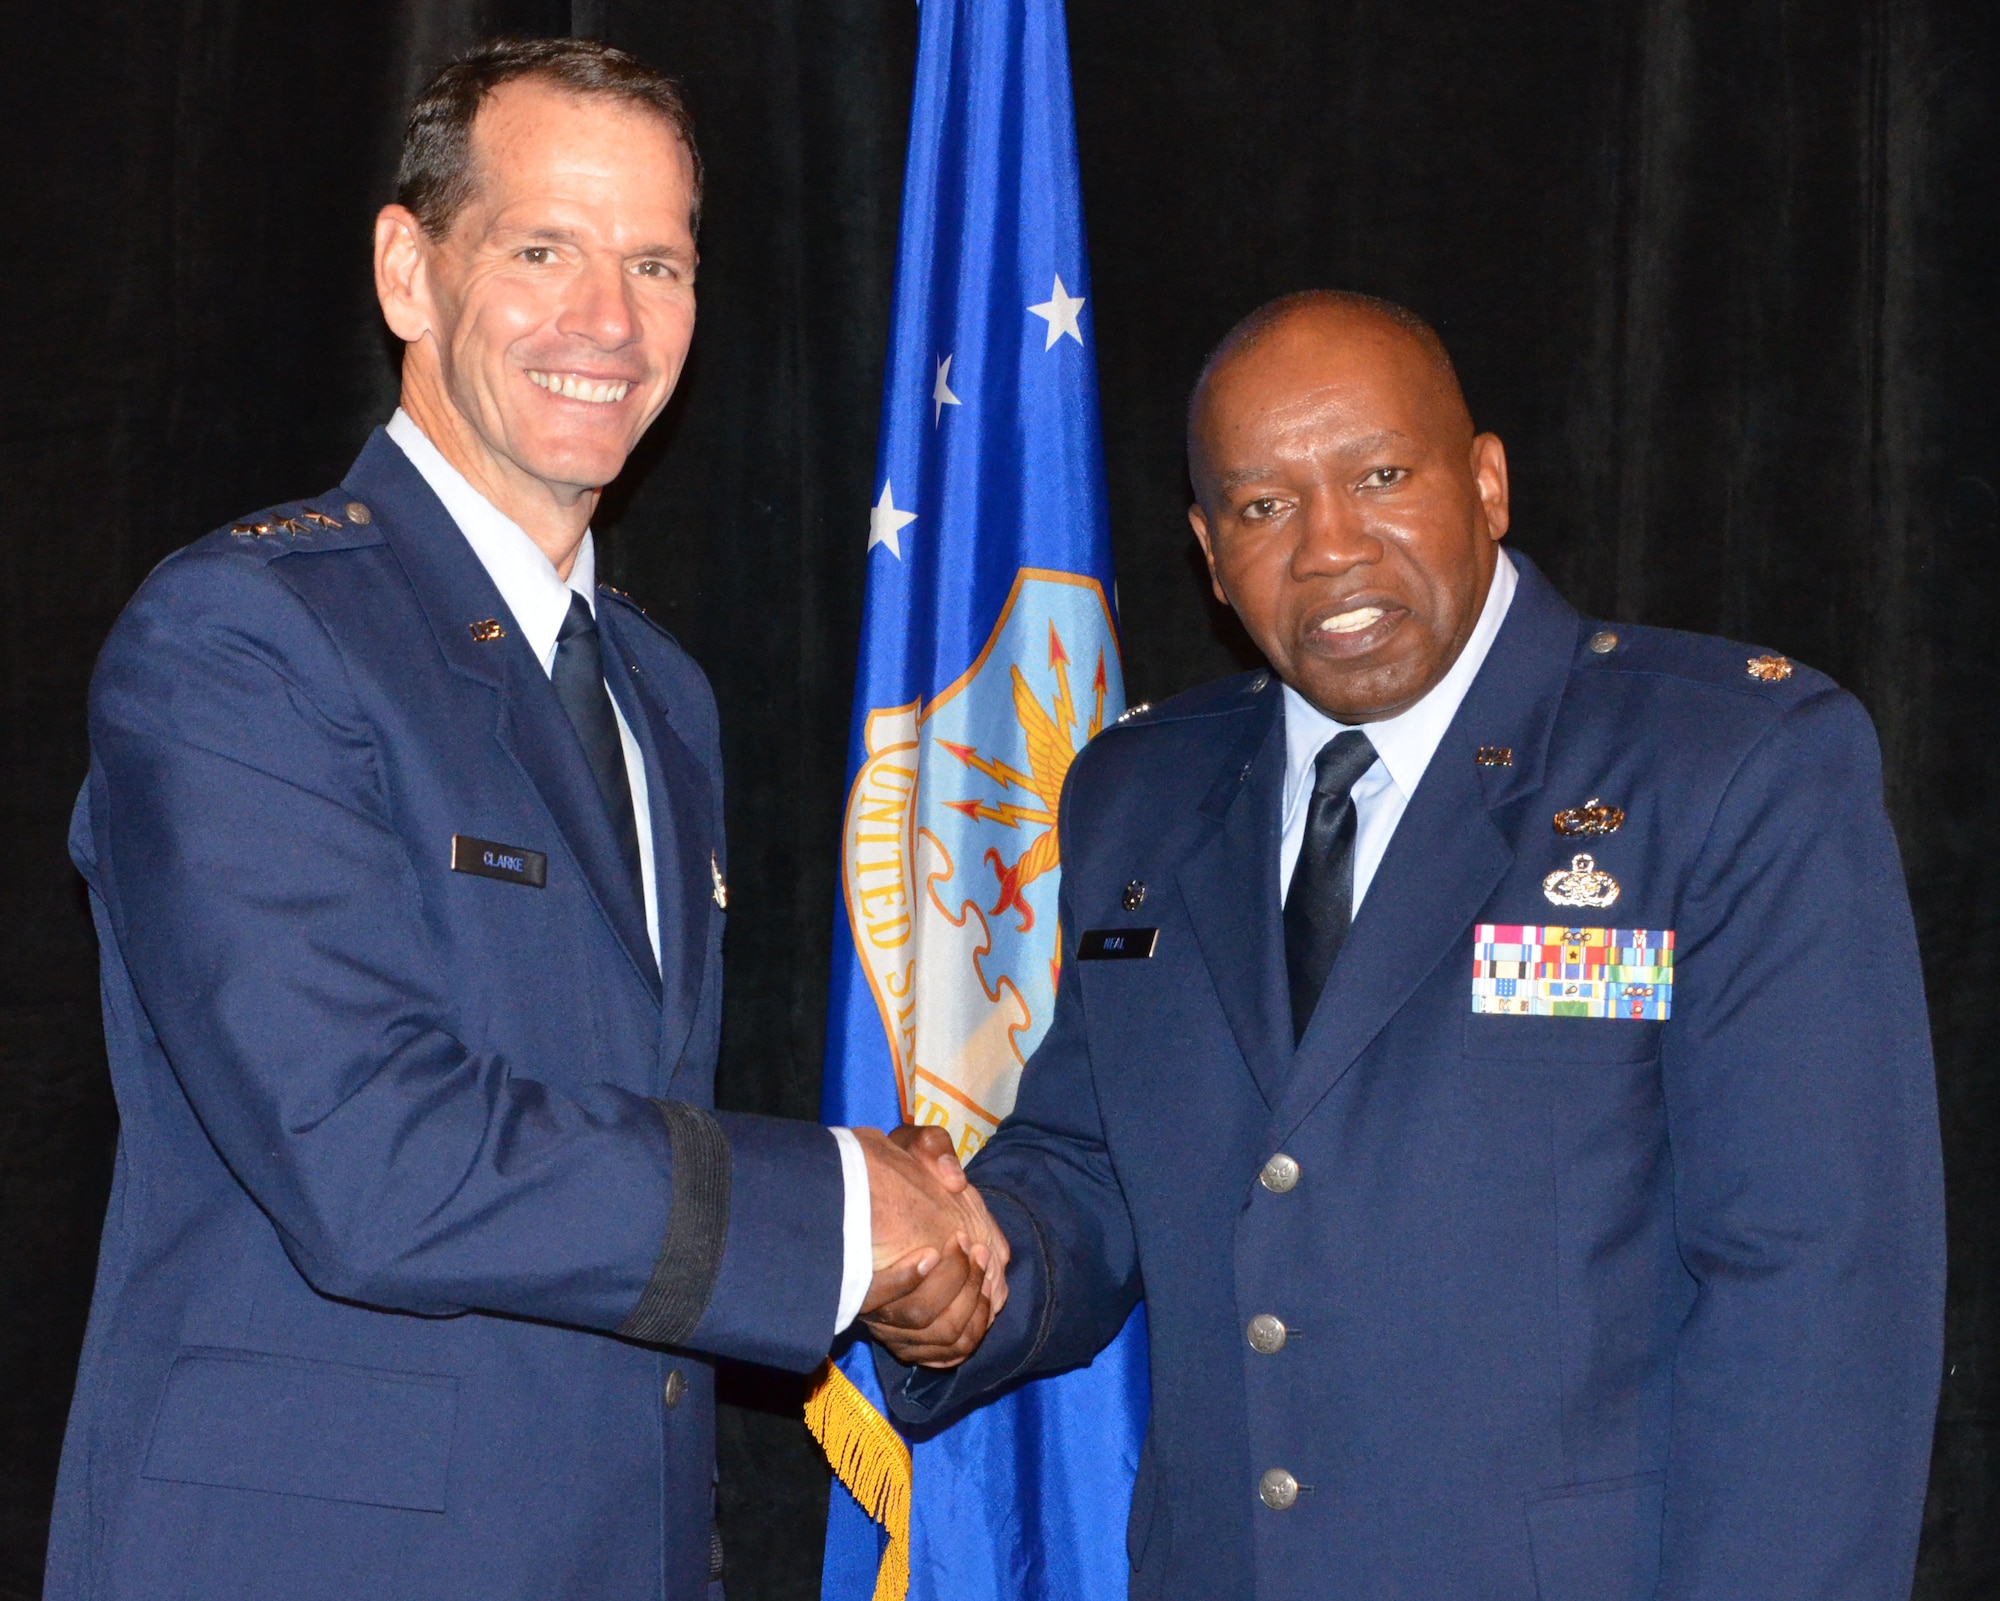 Director of the Air National Guard Lt. Gen. Stanley E. Clarke III (left) congratulates Roy Wilkins Renowned Service Award recipient Lt. Col. Anderson Neal Jr. during an Armed Services and Veterans Affairs Awards luncheon in Orlando, Fla., July 16, 2013. Photo by Master Sgt. Thomas Kielbasa